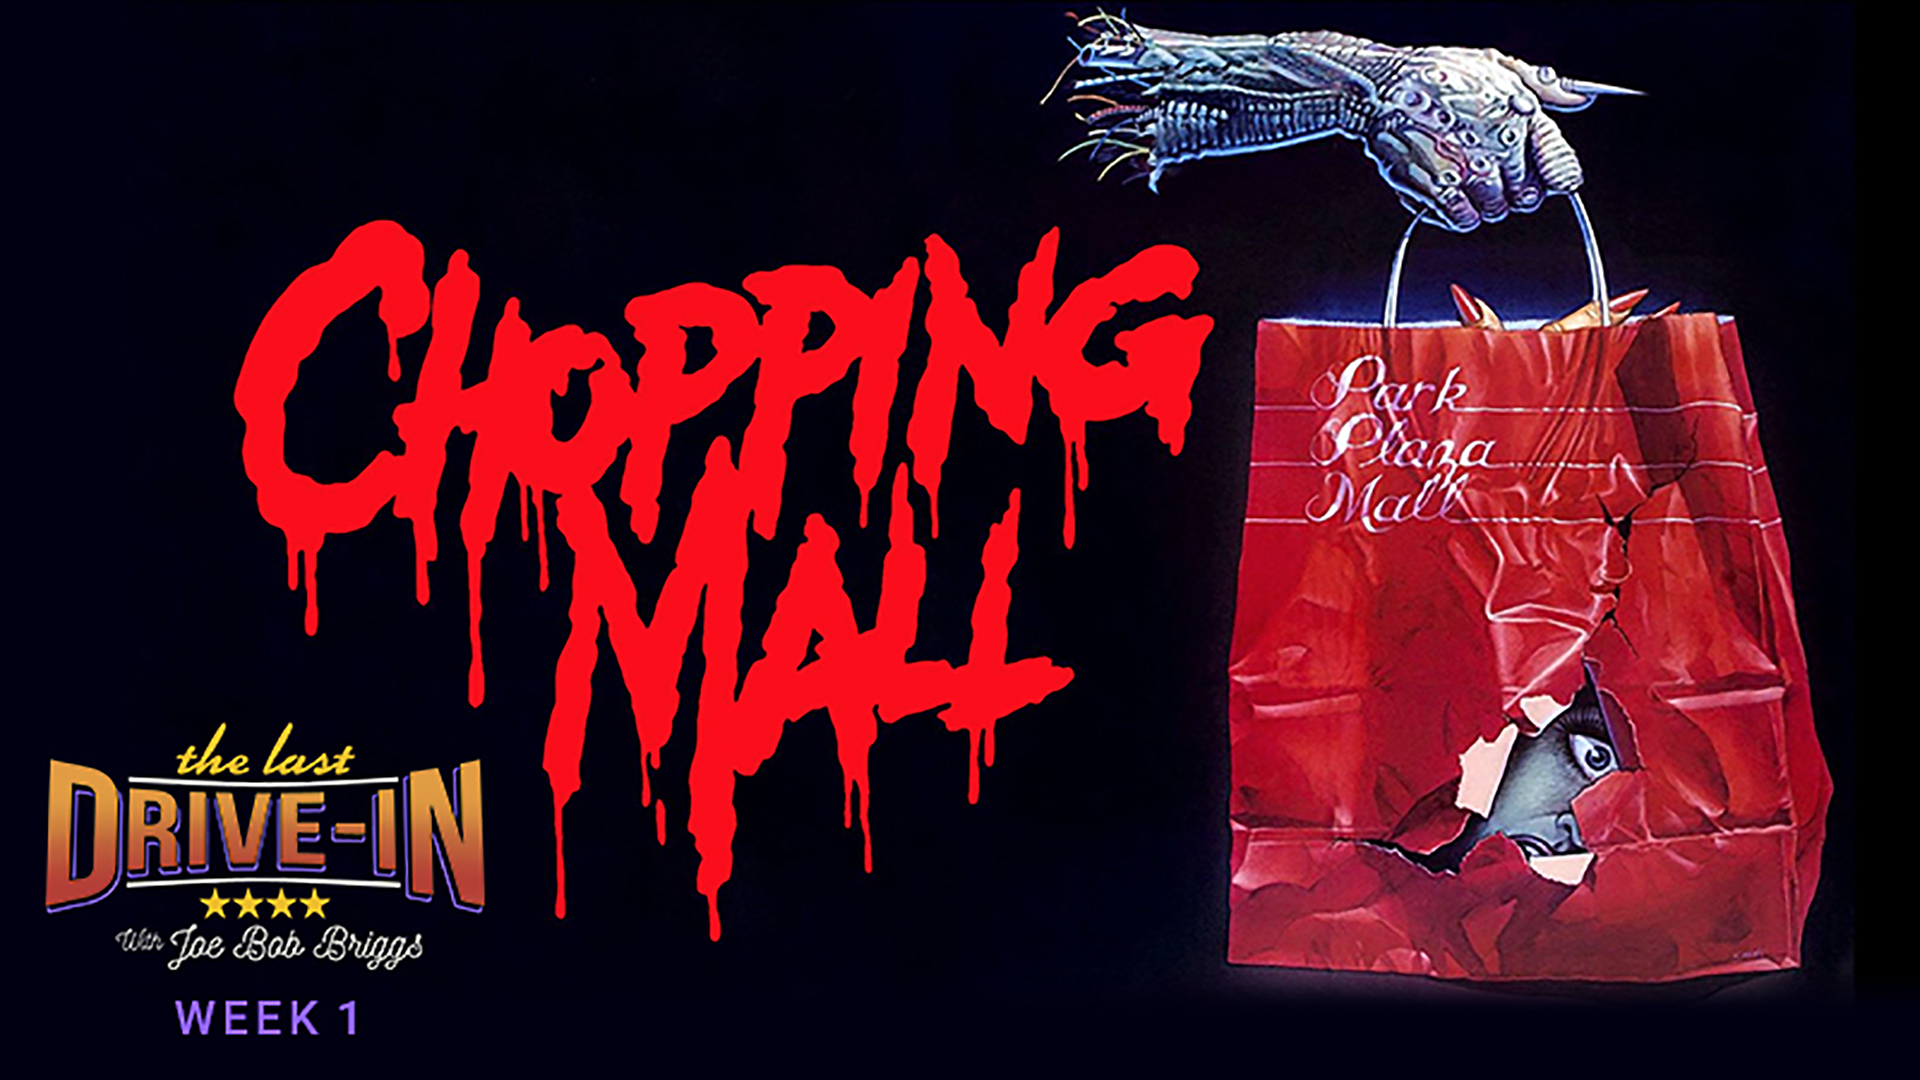 Week 1: Chopping Mall, In this slasher favorite, eight teenagers are trapped in a high tech shopping mall, pursued by killbots., TV-MA, Season 1028422, Episode 1